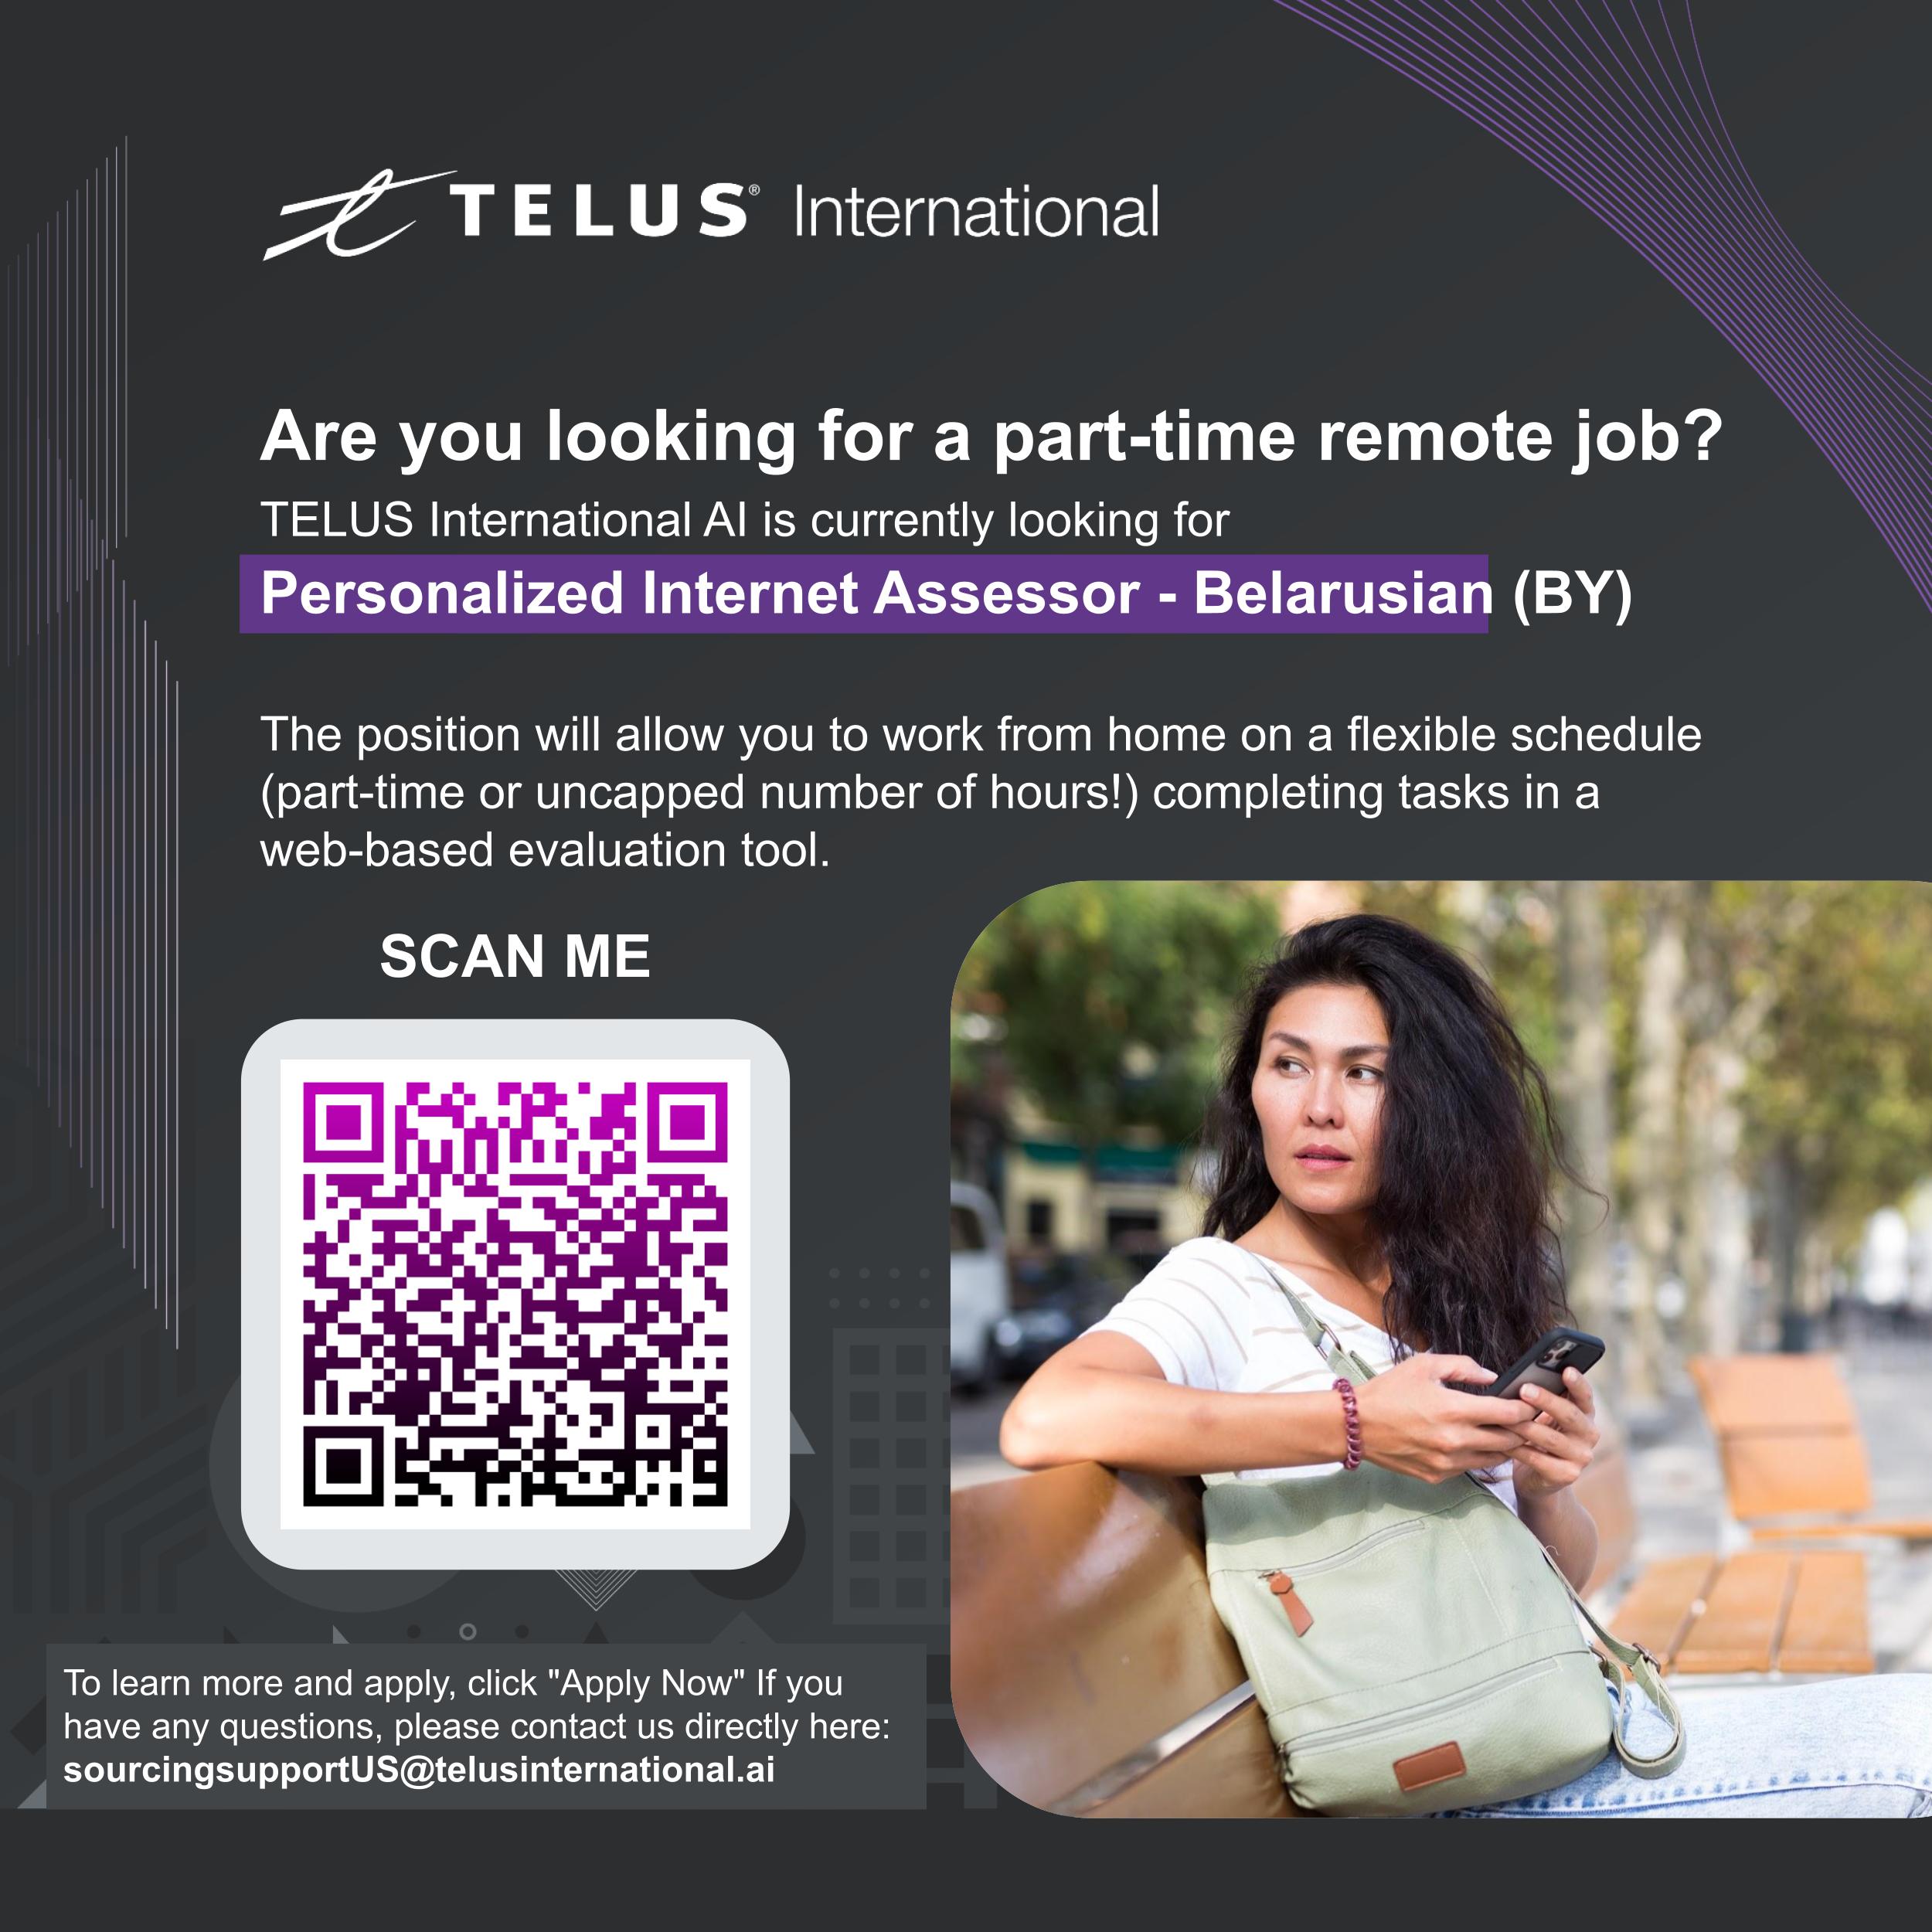 —Z TELUS International

Are you looking for a part-time remote job?
TELUS International Al is currently looking for
Personalized Internet Assessor - Belarusian (BY)

The position will allow you to work from home on a flexible schedule
(part-time or uncapped number of hours!) completing tasks in a
web-based evaluation tool.

SCAN ME

 

 

 

To learn more and apply, click "Apply Now" If you
have any questions, please contact us directly here:
sourcingsupportUS@telusinternational.ai